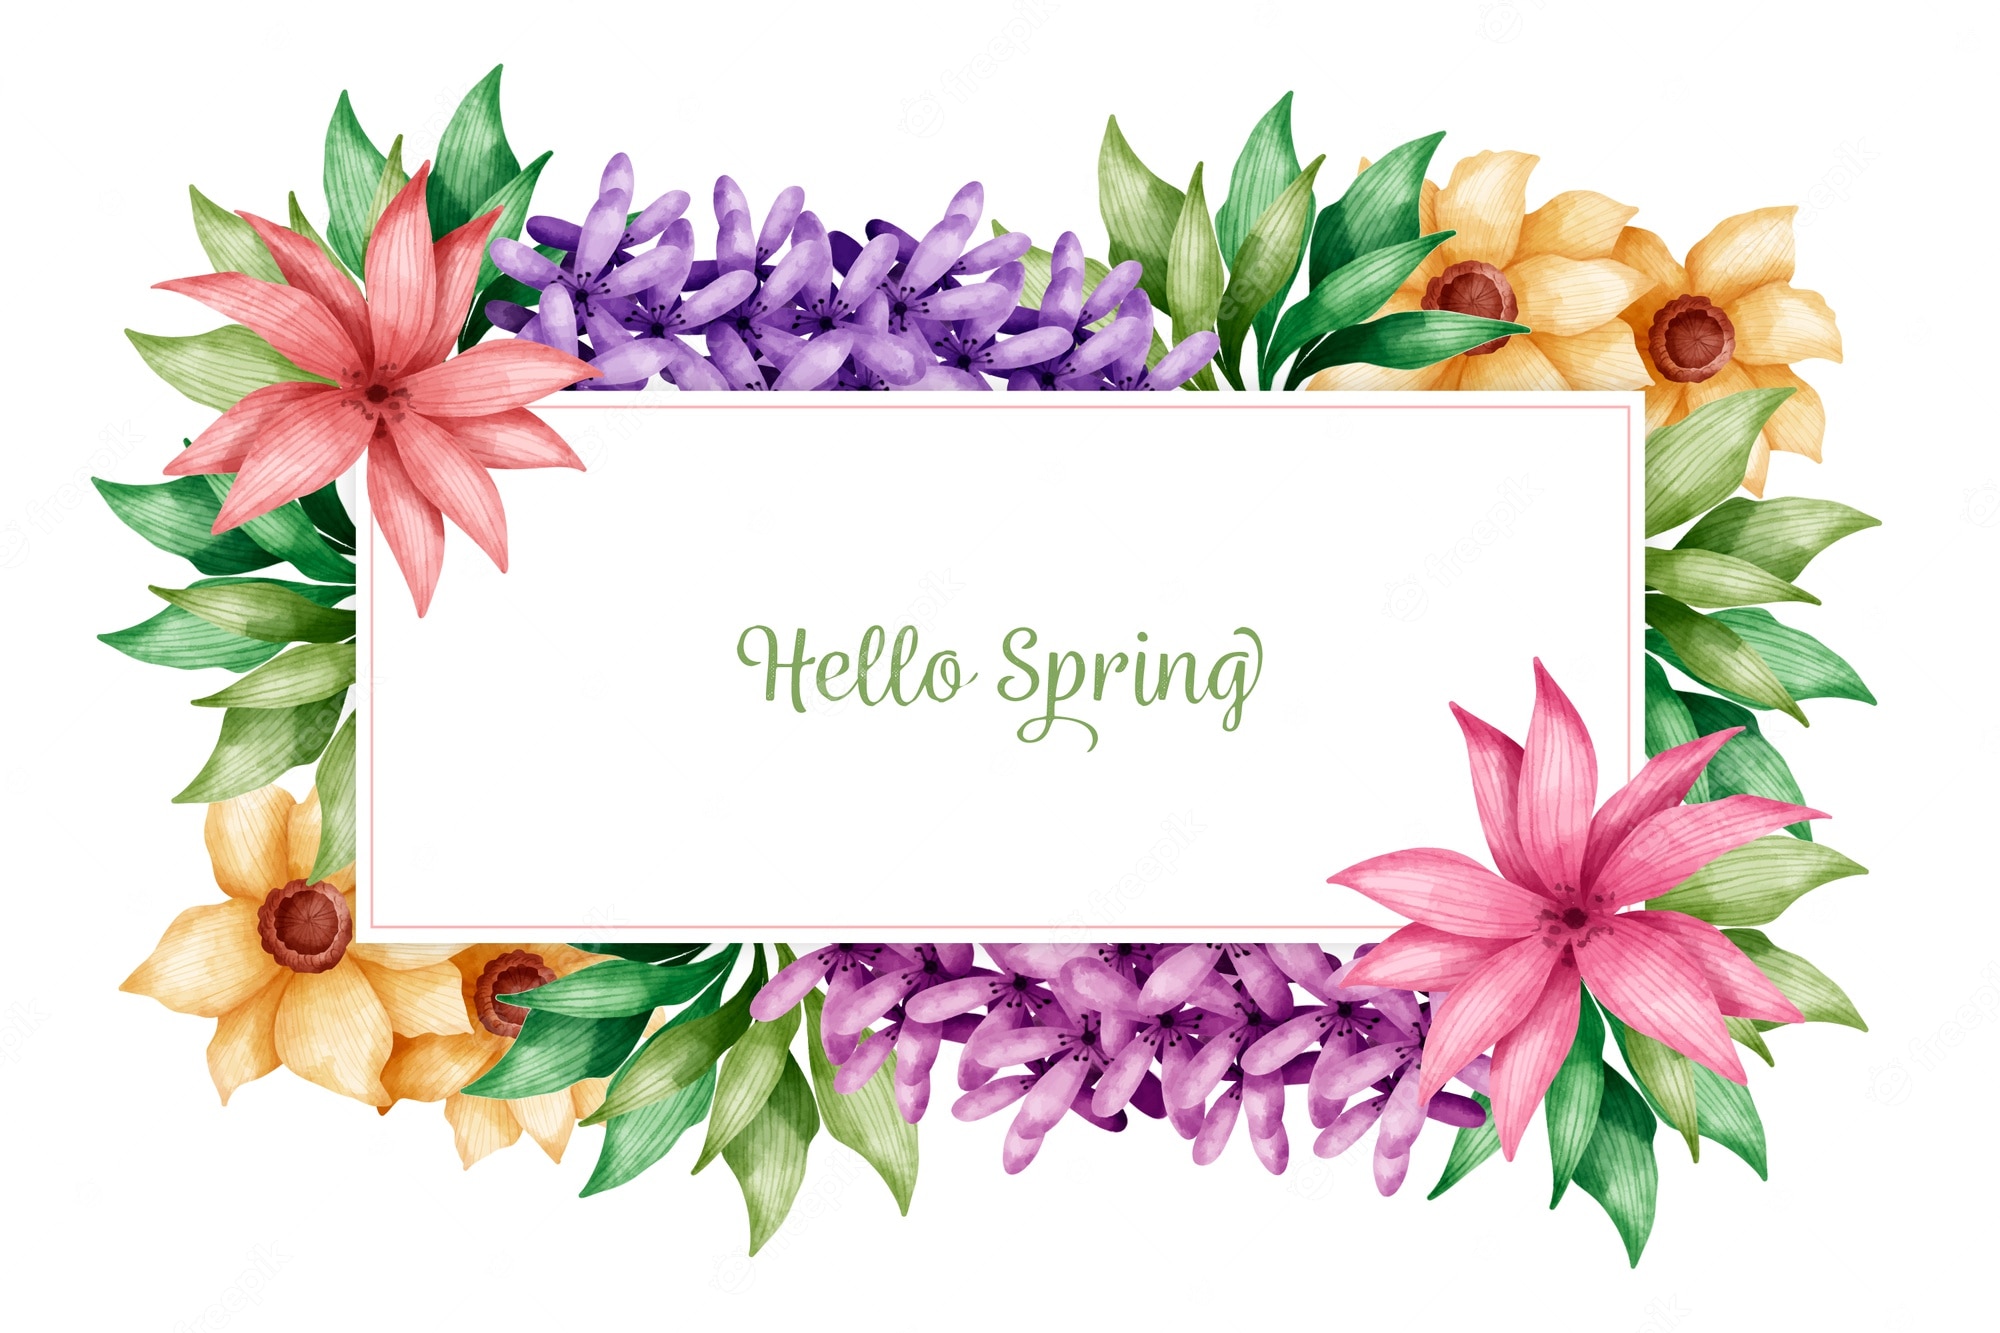 Free Vector. Hello spring wallpaper with colorful flowers